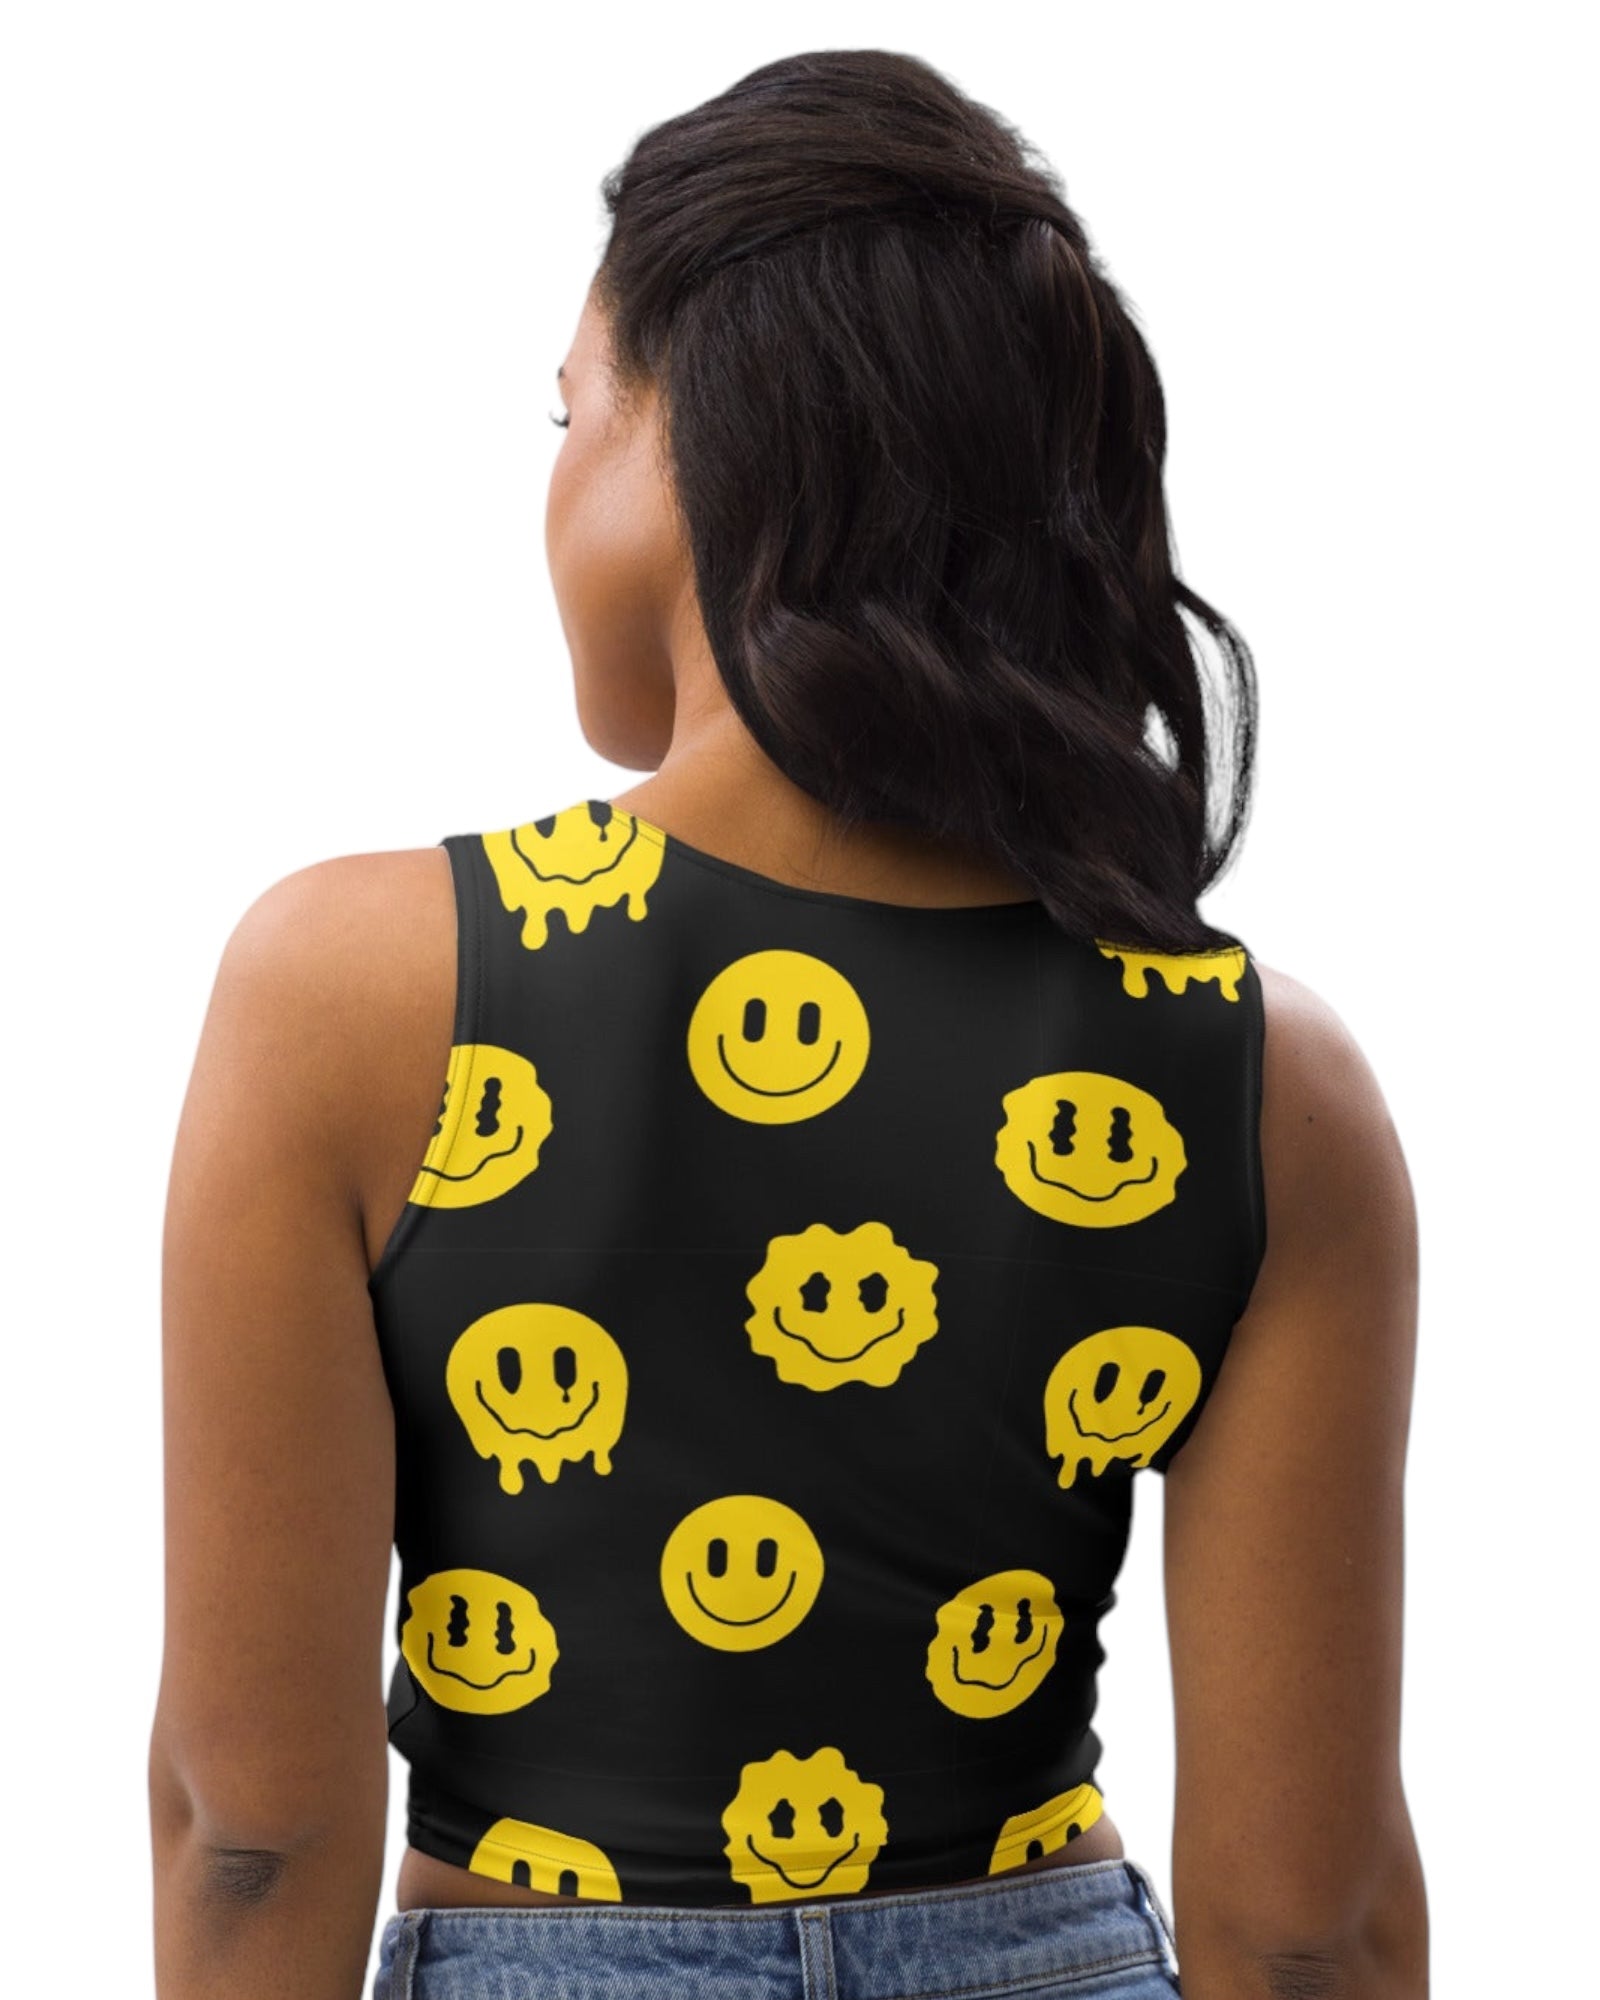 Women showing the back view of Trippie Crop Top - Patterned with yellow smiley faces on black, showcasing the back design of this crop top for rave wear.